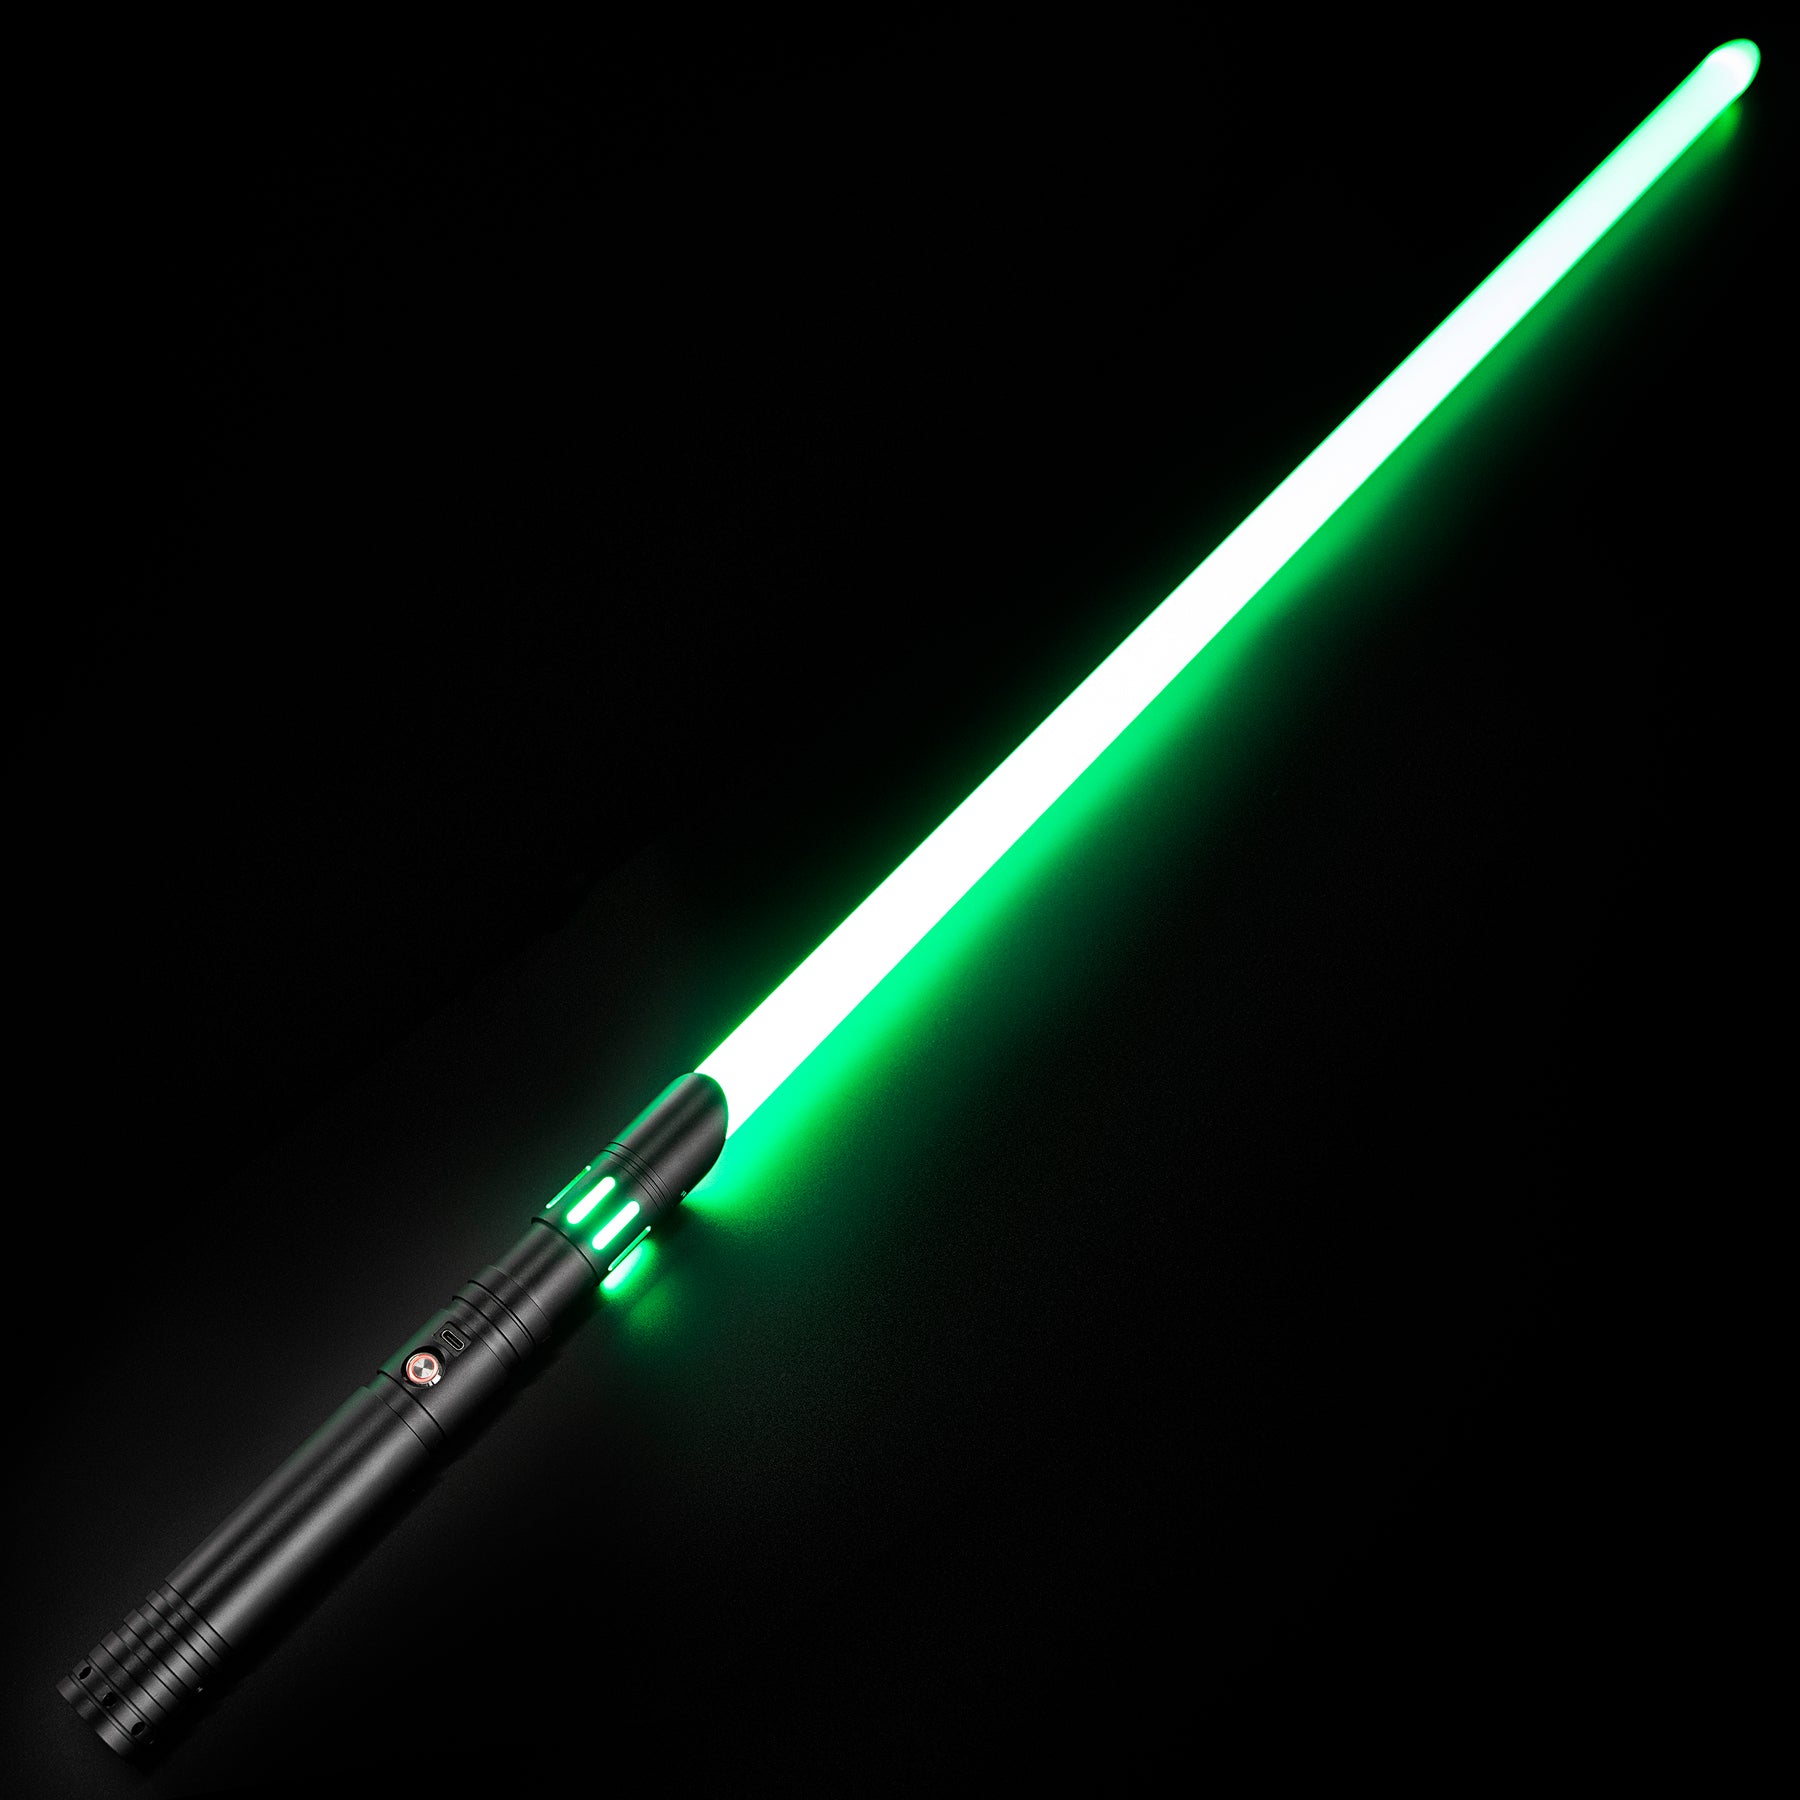 SaberCustom Dueling Xenopixel v3 Light Saber Smooth Swing Infinite Colors Changing C007